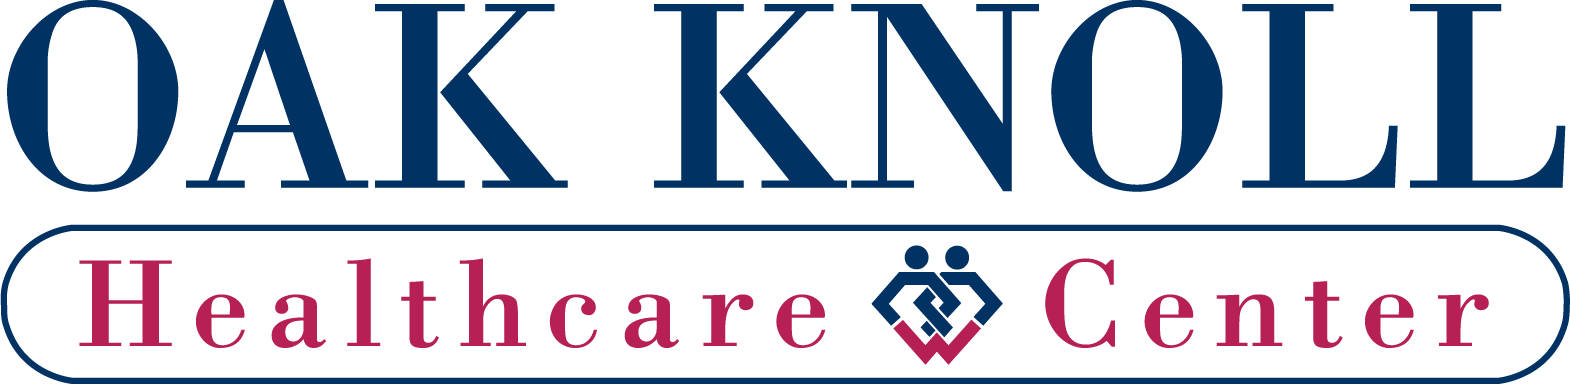 Family review of Oak Knoll Healthcare Center, After several years of receiving underwhelming care at various other nursing facilities we are ecstatic that we found Oak Knoll for our beloved family matriarch!